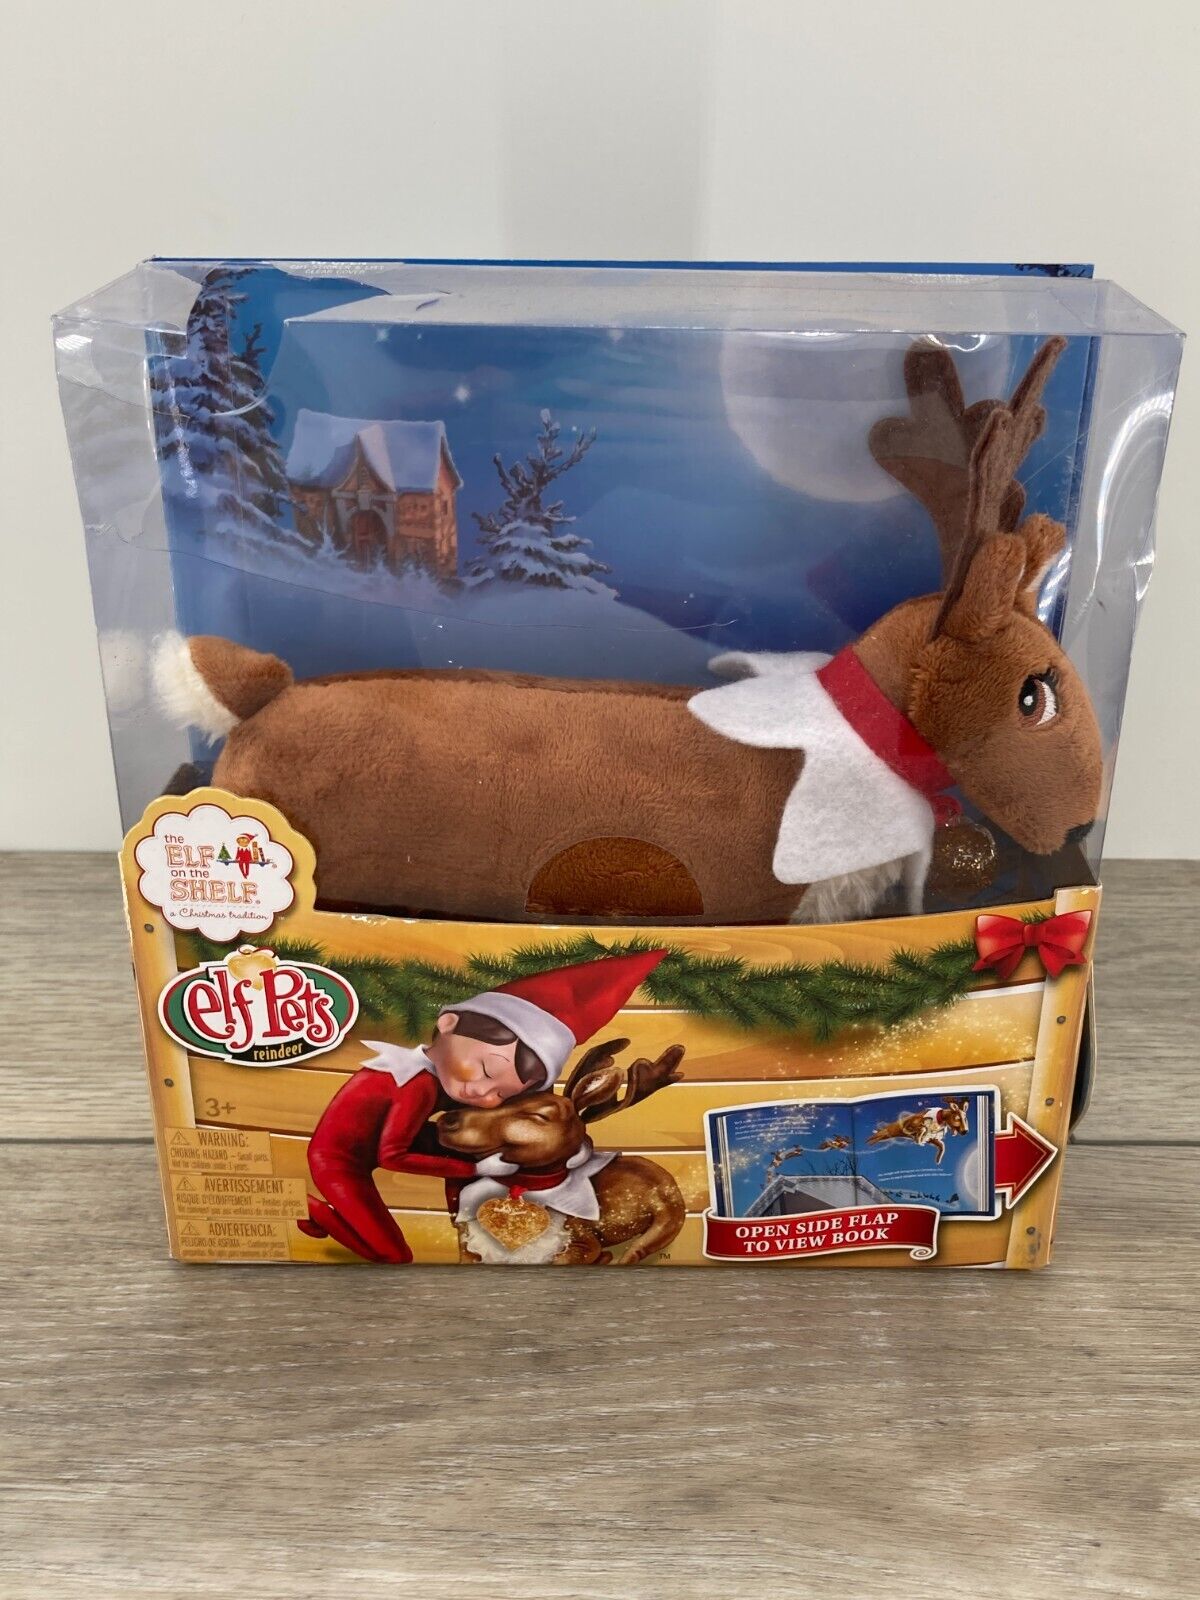 The Elf on the Shelf 2014 Pets Reindeer Plush Toy and Storybook Set by C Bell